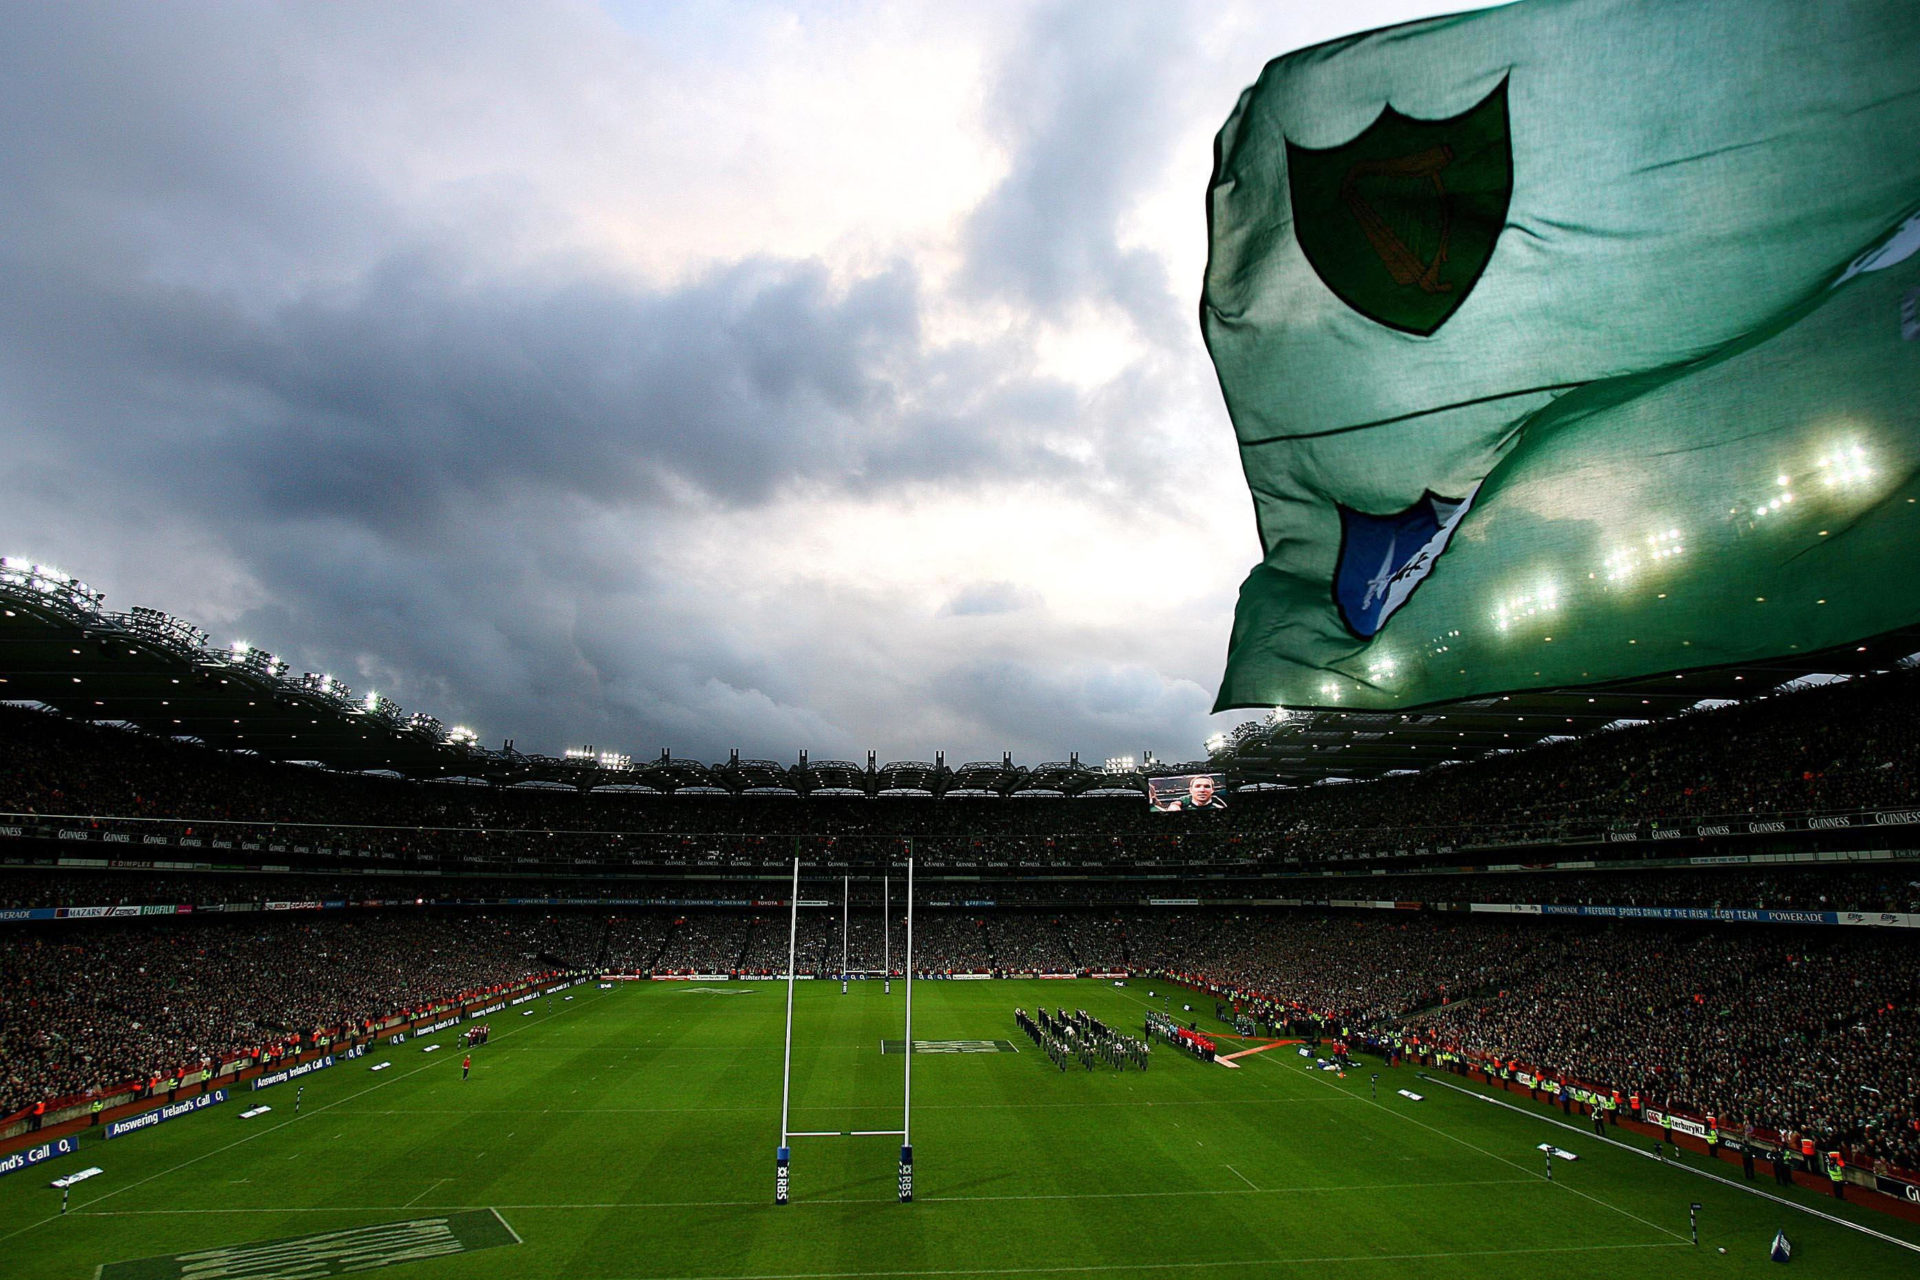 General view of Croke Park during the RBS 6 Nations match between Ireland and England.